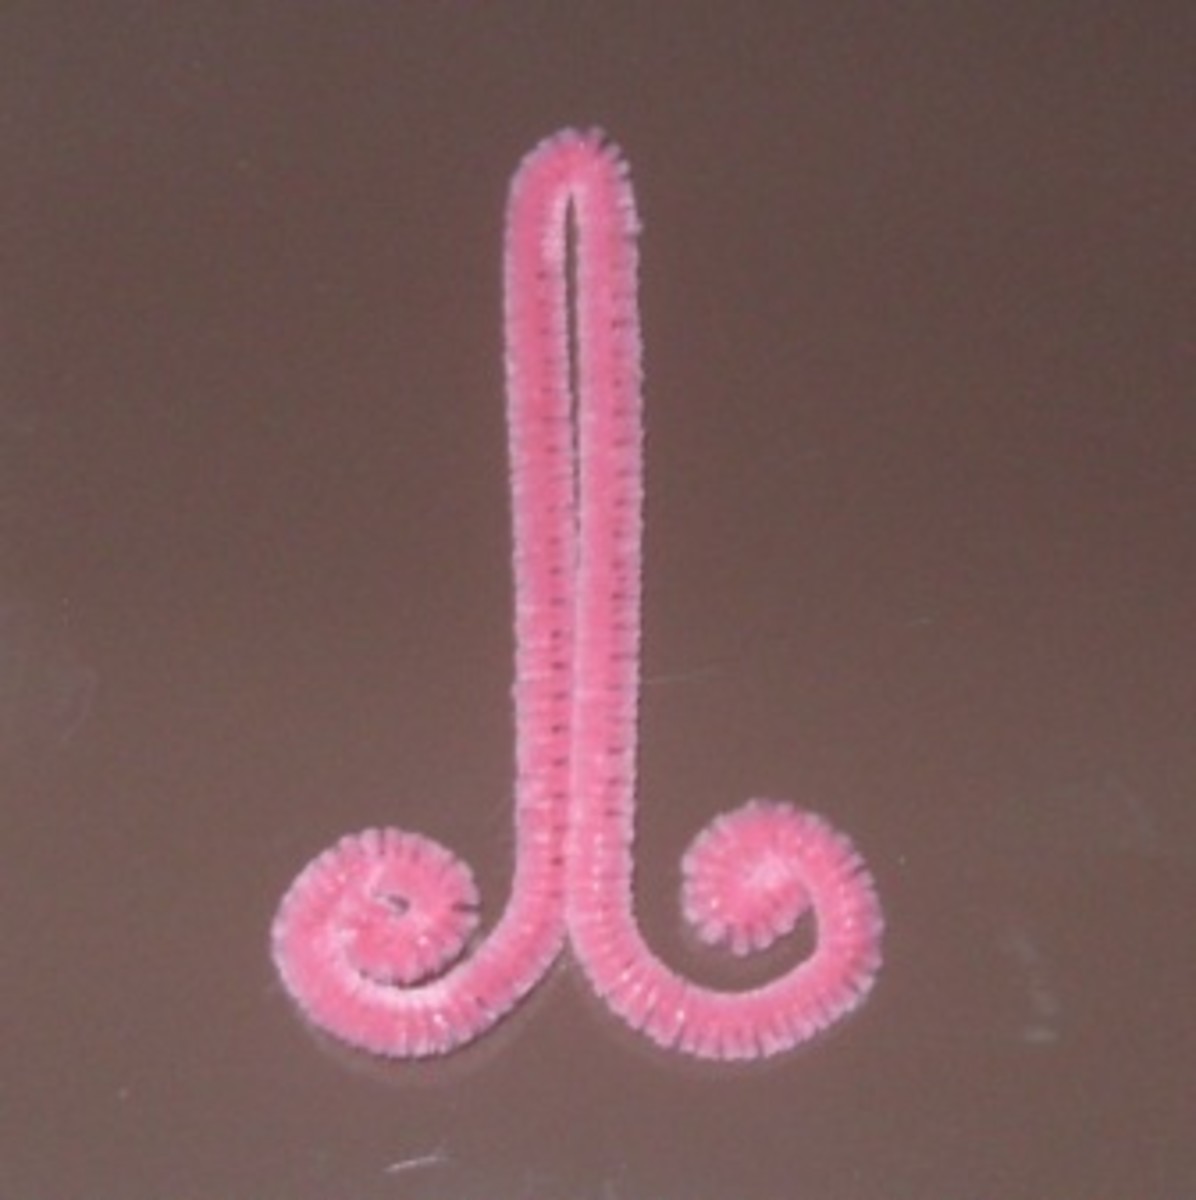 1. Bend a thin pink pipe cleaner in half and curl the ends into 2 small spirals.